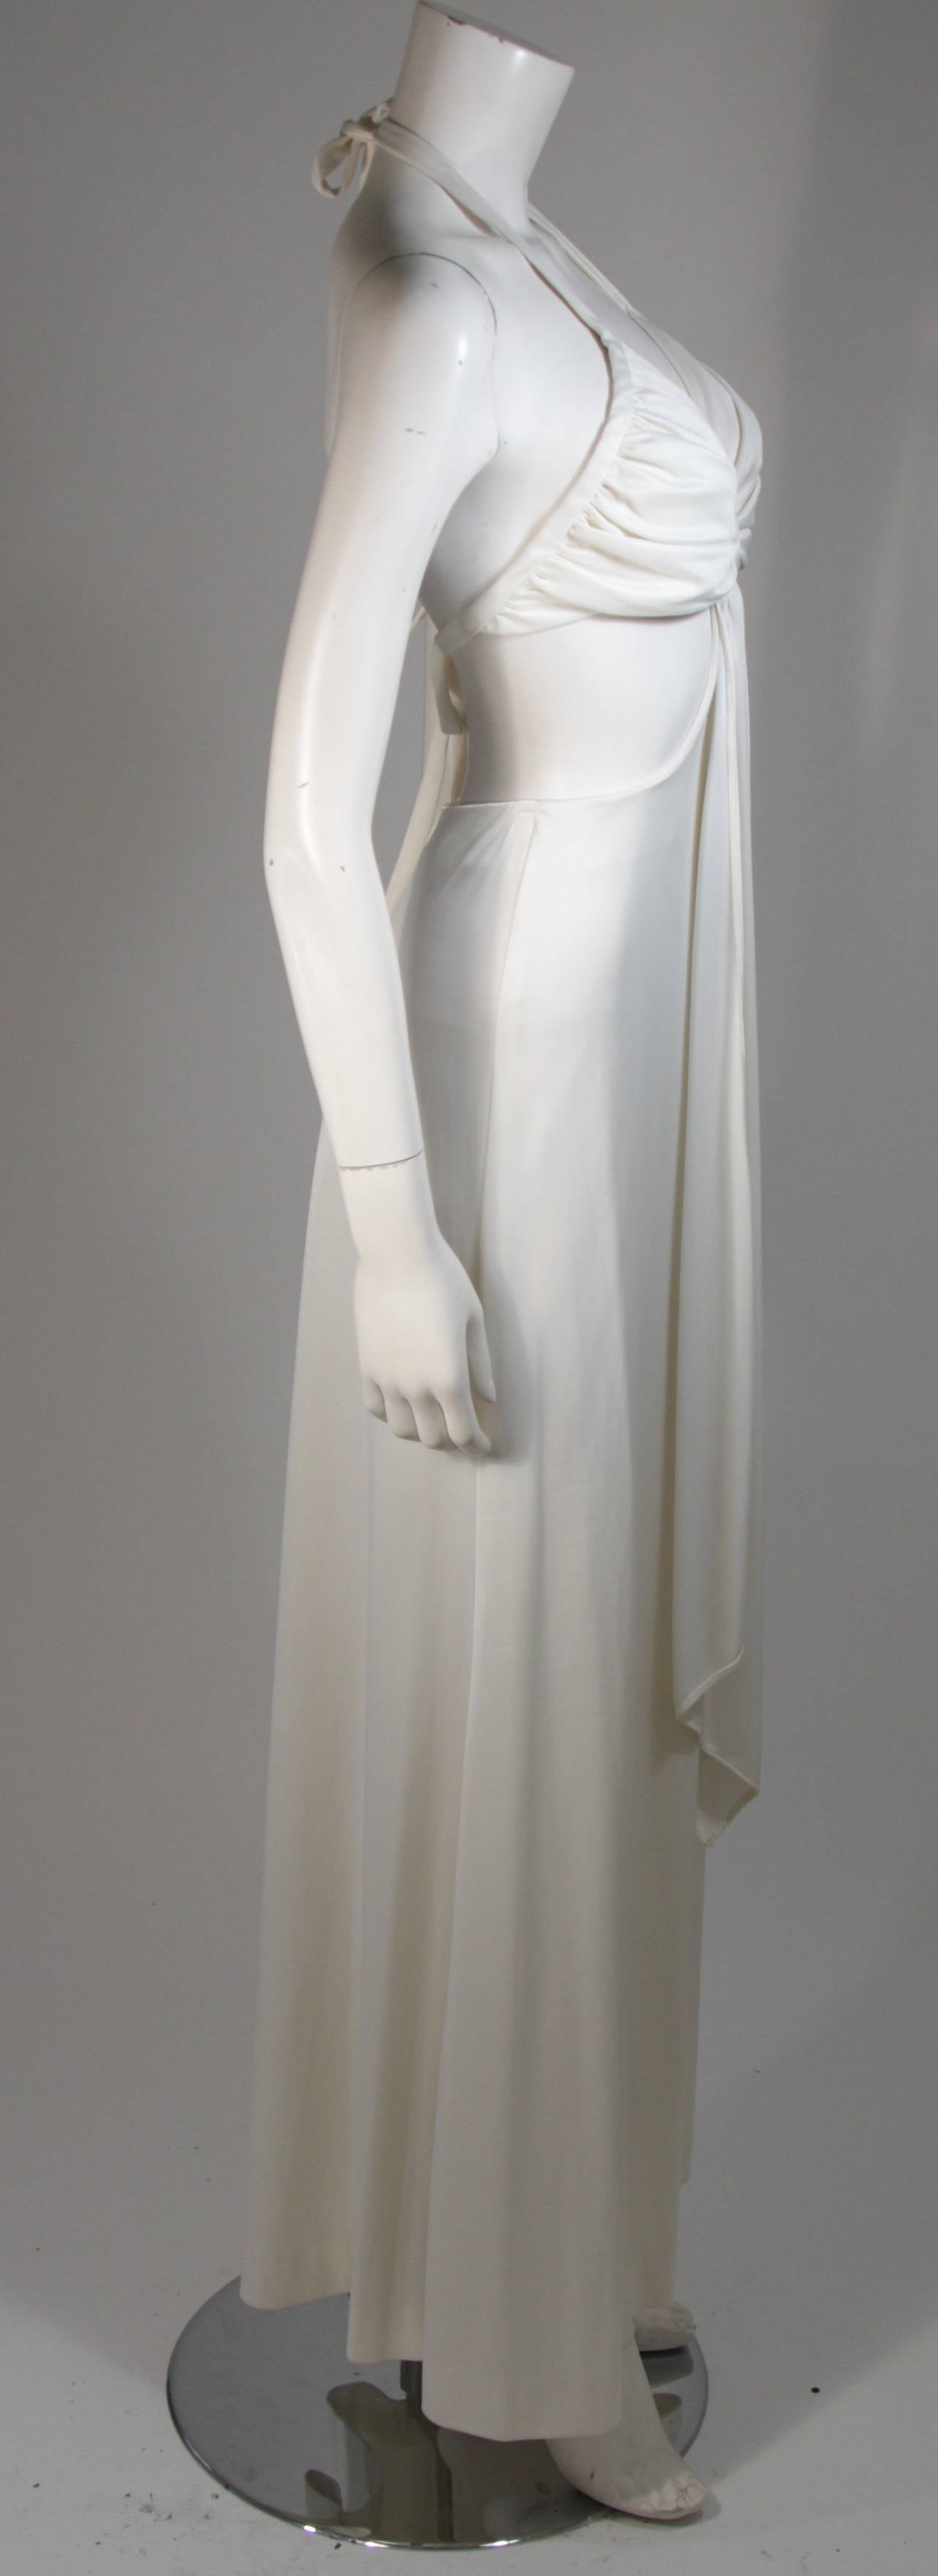 Women's Funky 1970's White Draped Jersey Gown with Exposed Sides Size Small